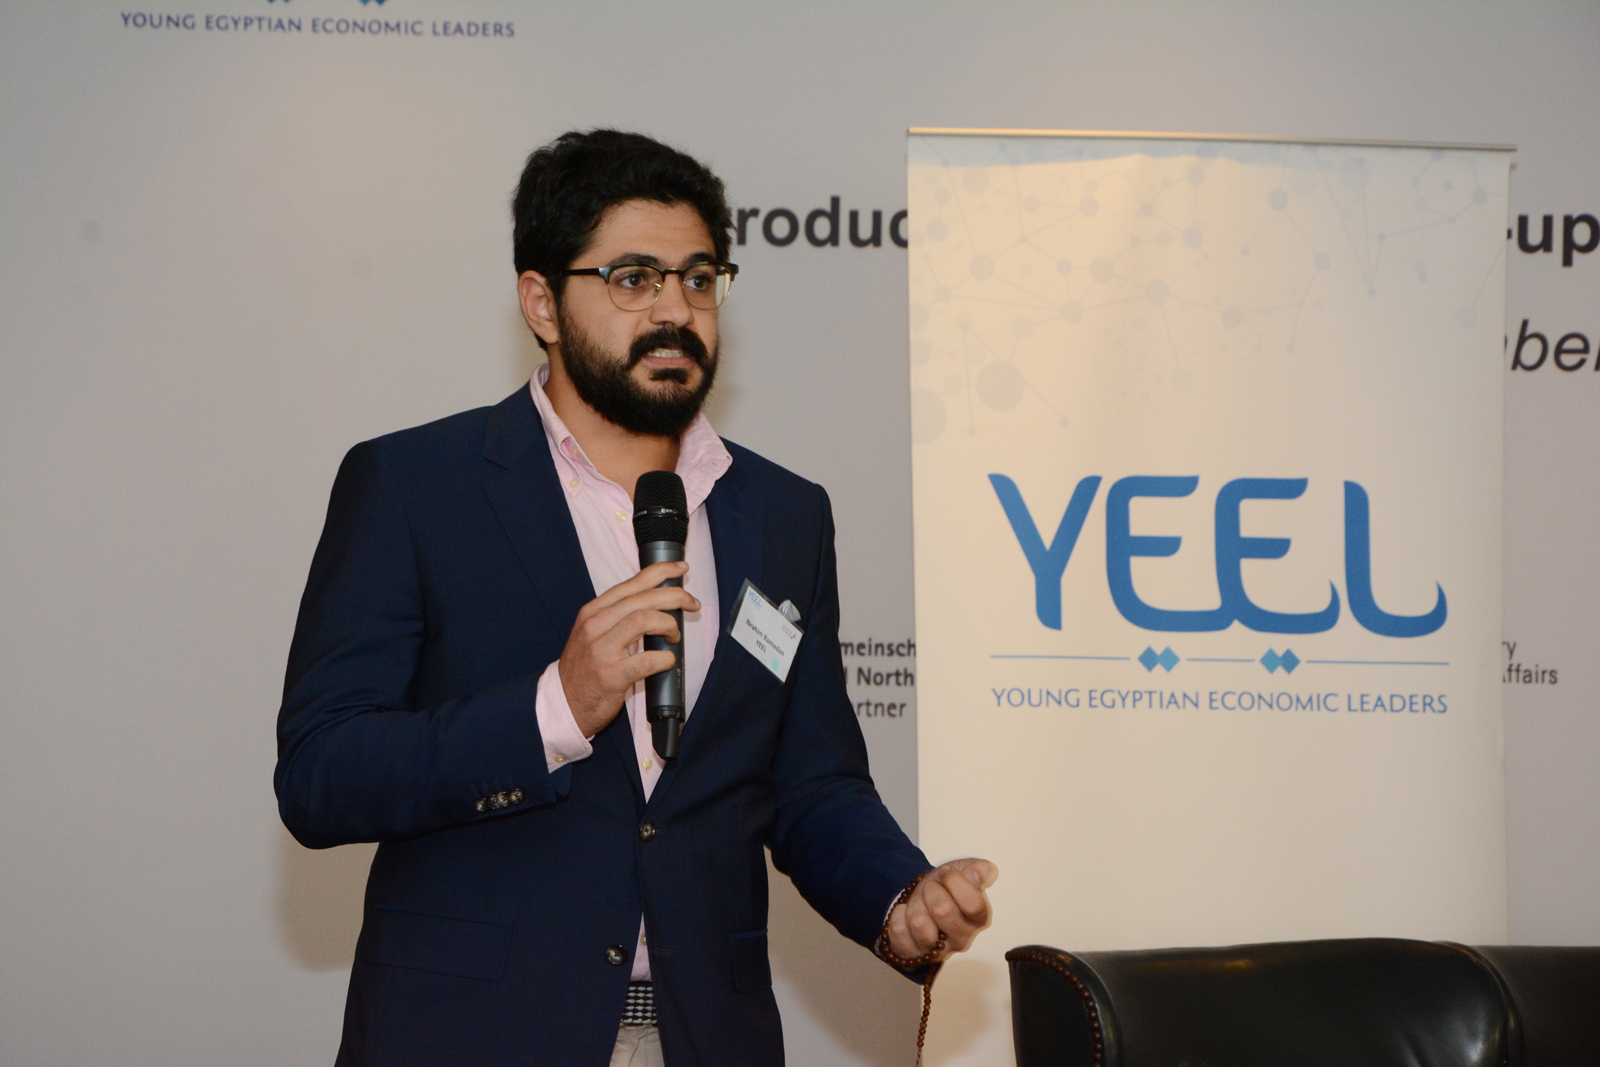 Ibrahim Ramadan is one of the YEEL members and is also an associate at Sawari Ventures, a VC firm based in Cairo.